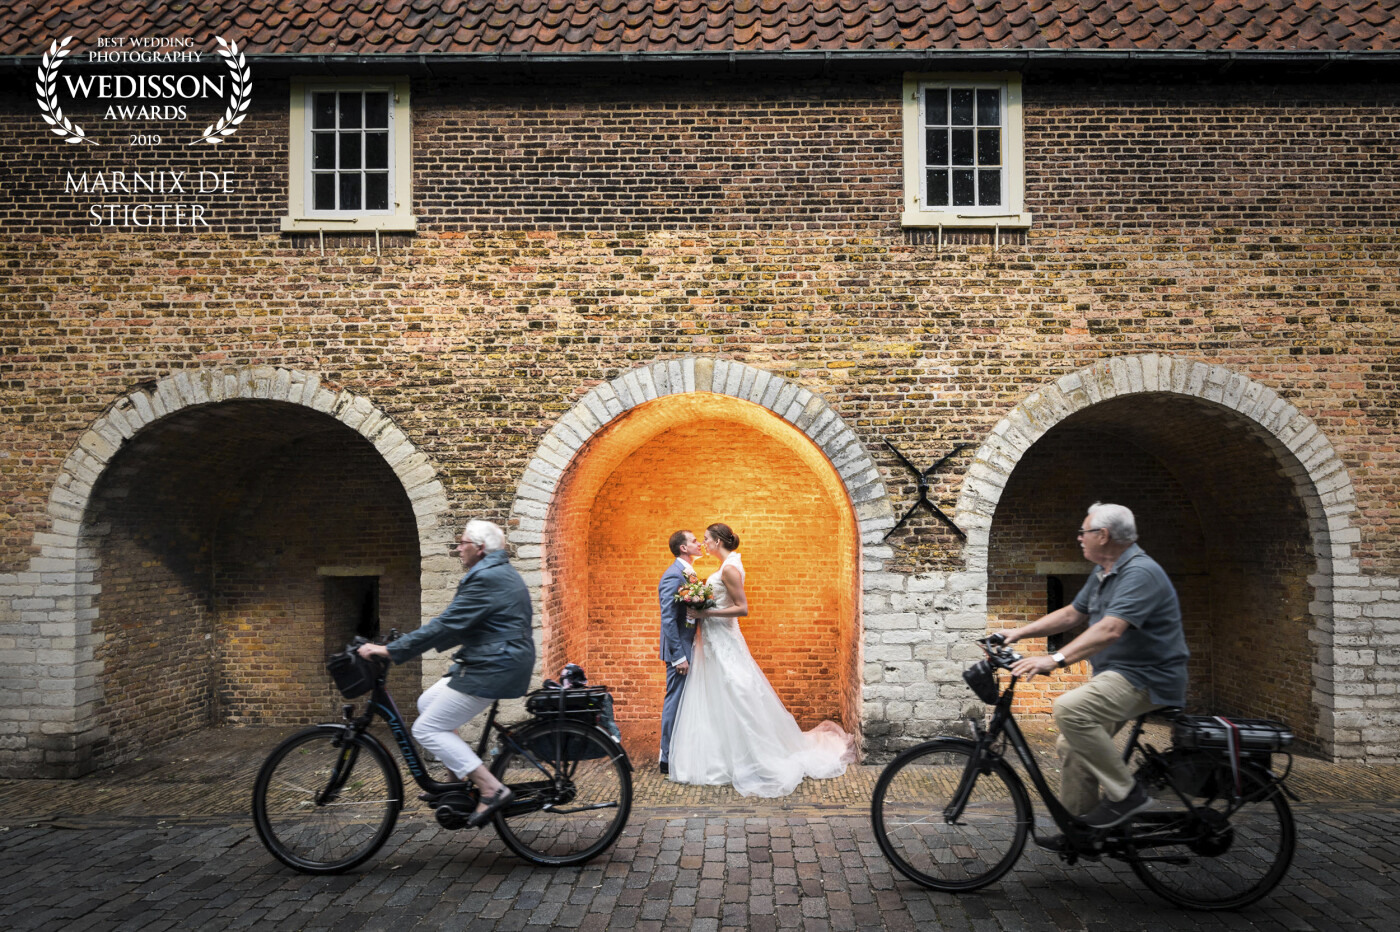 Taken in the beautiful old center of Delft, the Oostpoort is a favorite place for couples to pose during their wedding day. Since there were many people biking there and I wanted to do something a little different this idea quickly came to mind. It only took a few shots to get it right with the timing of the elderly couple.